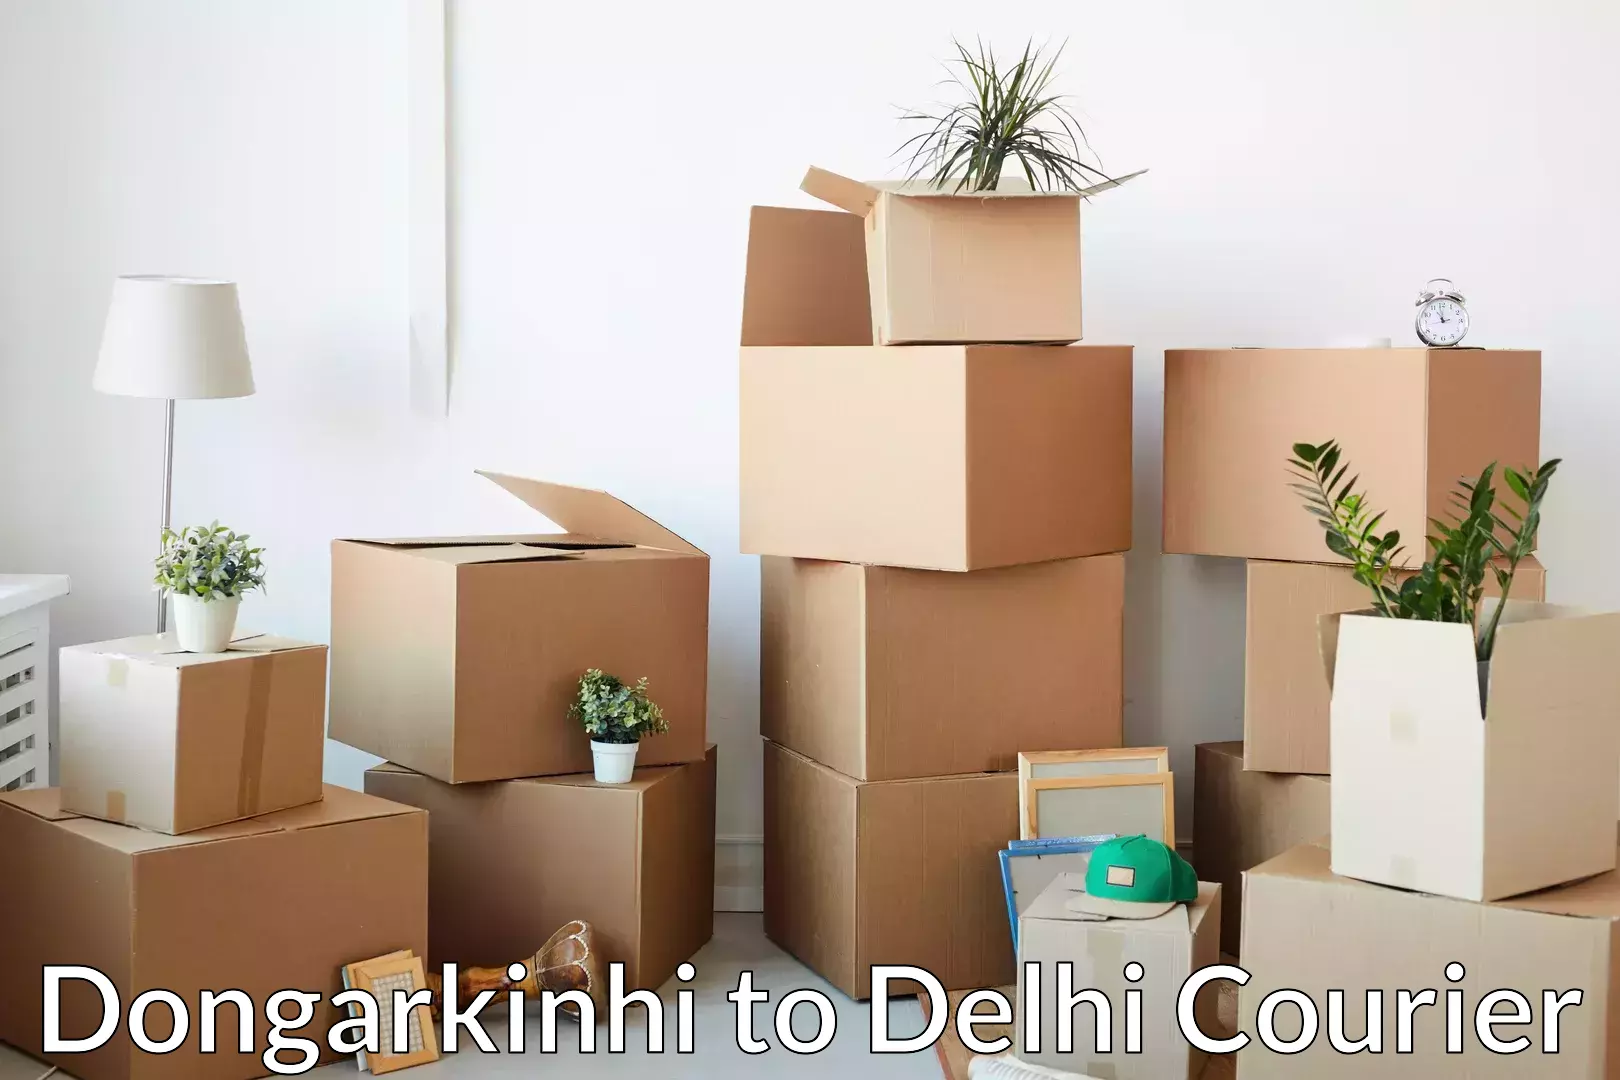 Reliable relocation services Dongarkinhi to Delhi